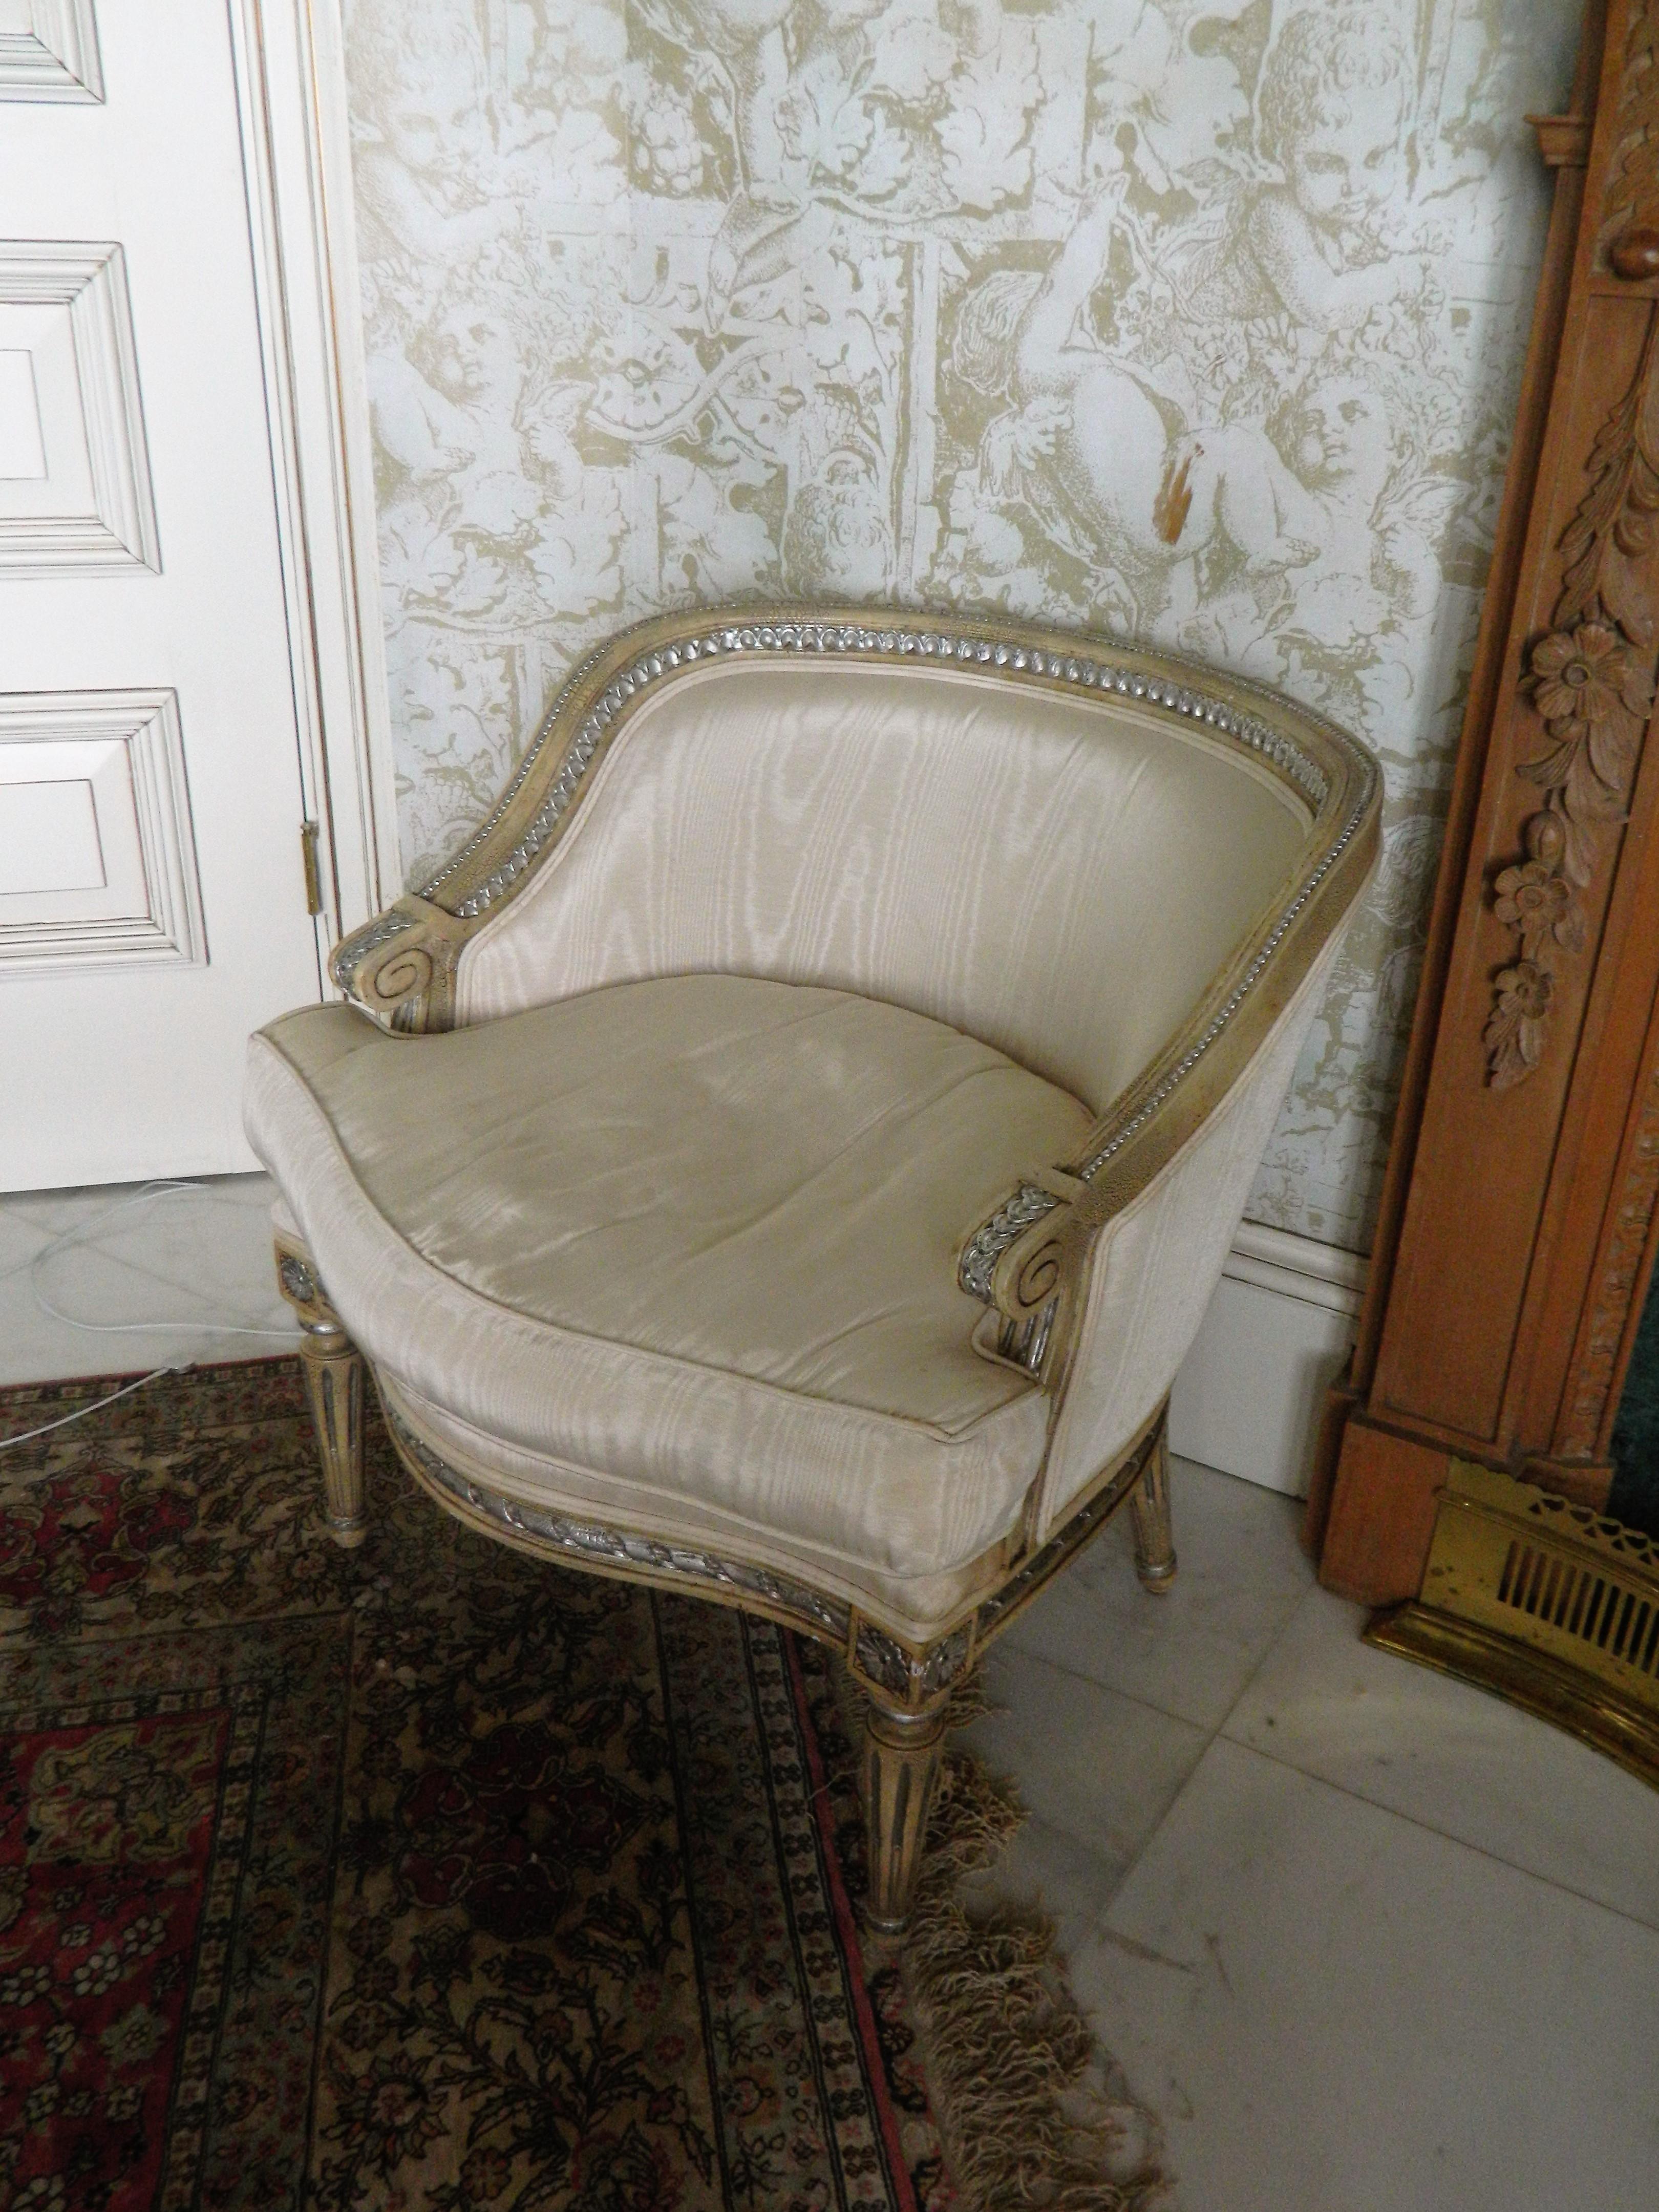 Louis XVI style painted boudoir or bergere chair, 20th century. Chair requires new upholstery. Stains on the back of the chair.